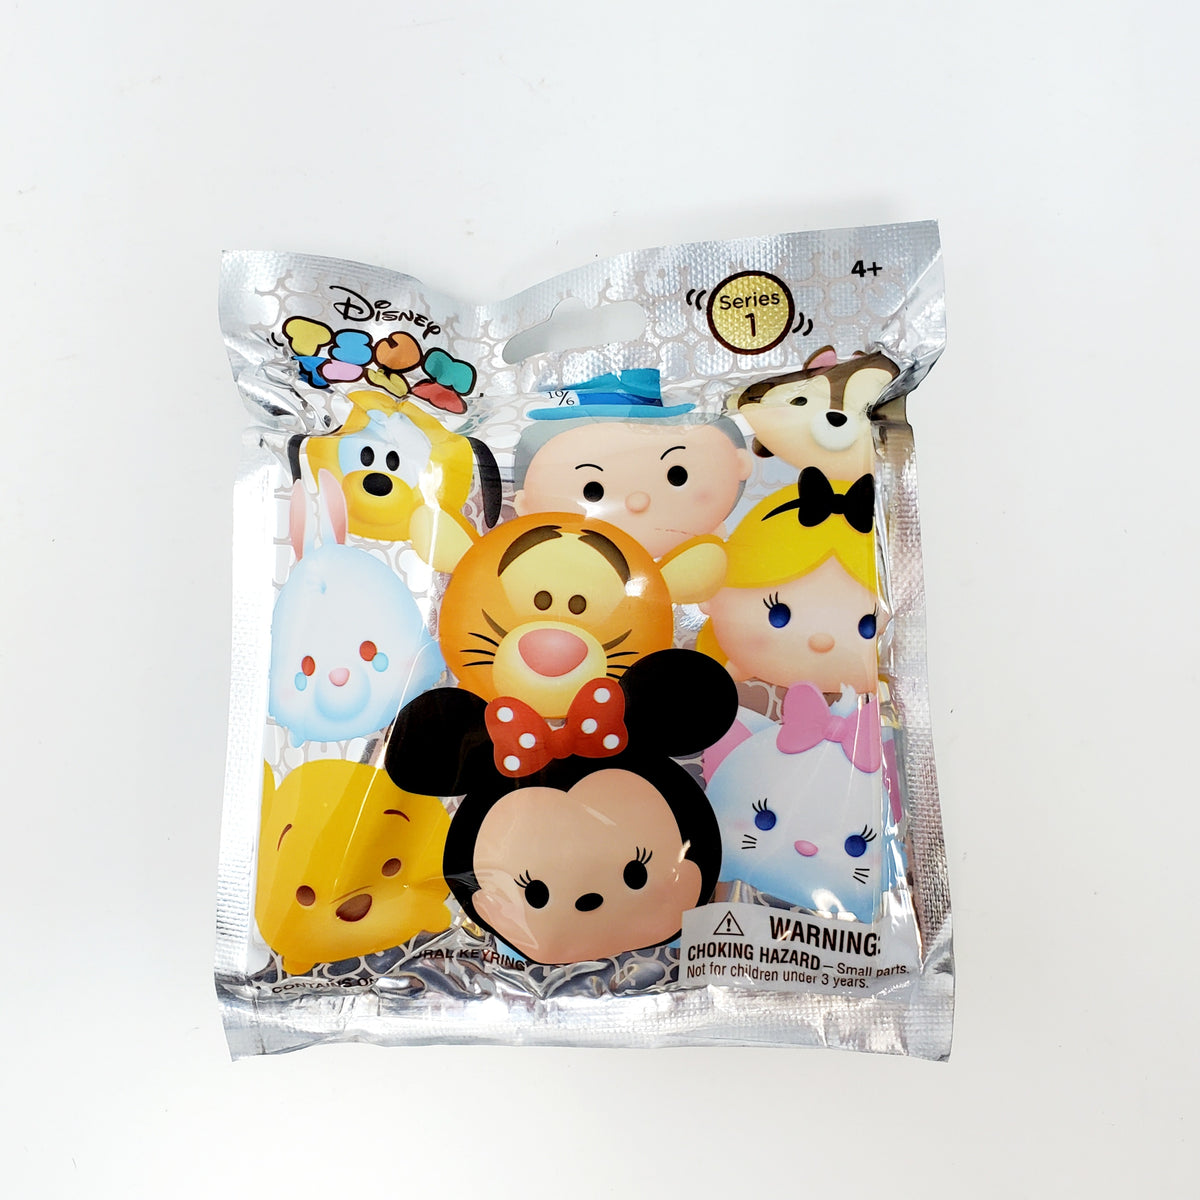 Disney Tsum Tsum Buttons Collection Set of 6 Shank Back Jesse